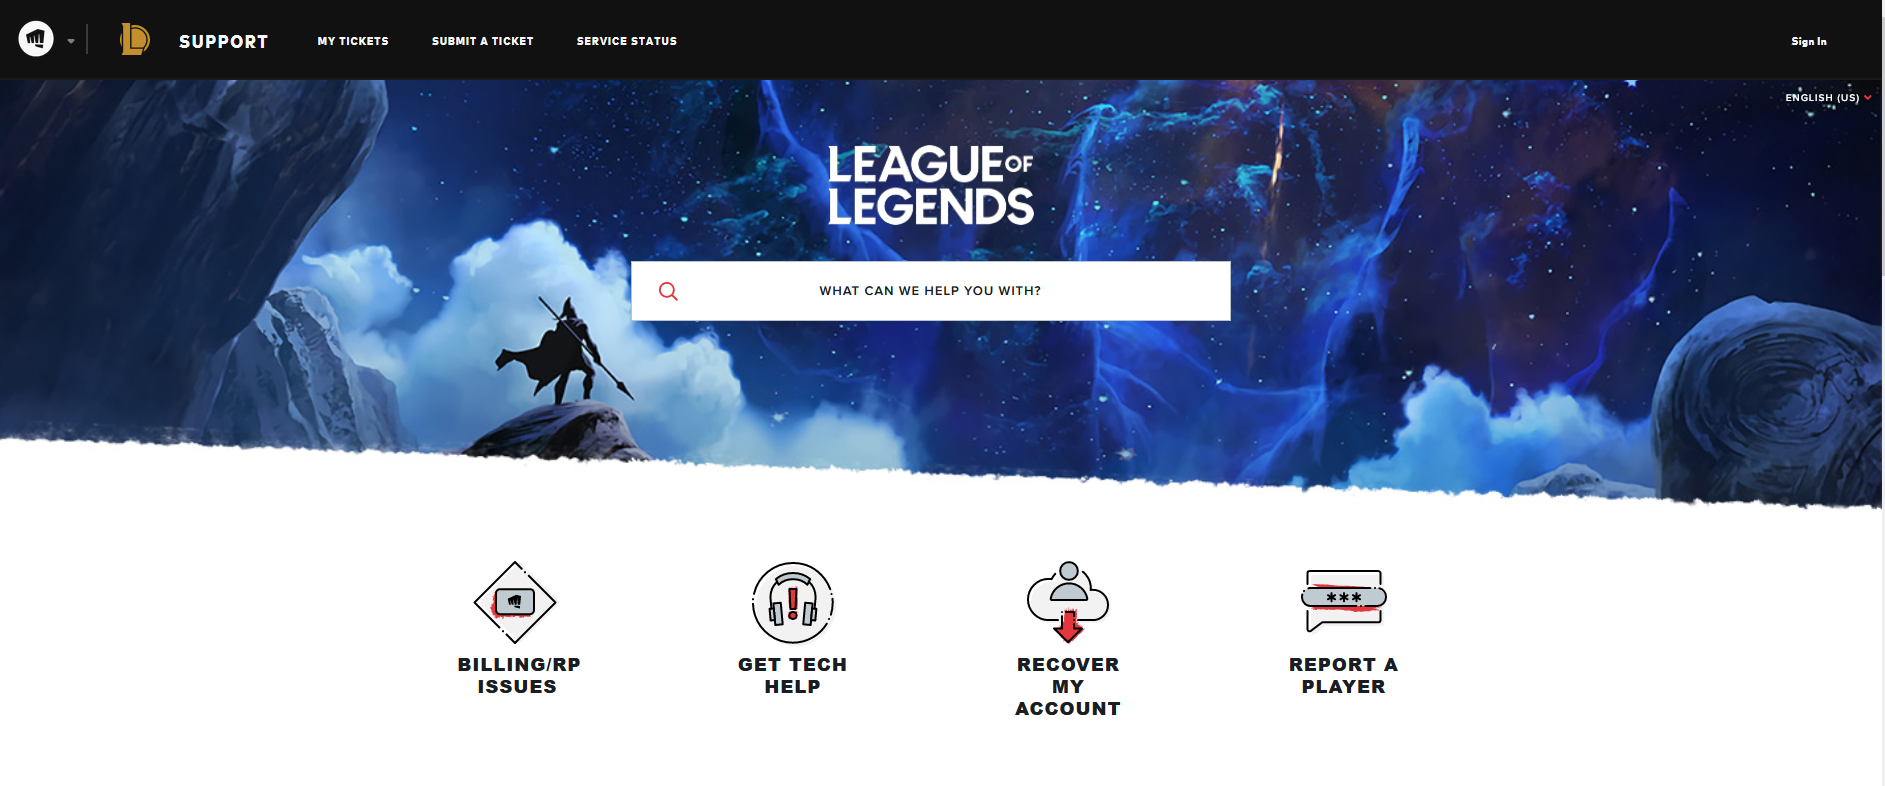 How to create a Riot Games Account for League of Legends: Wild Rift